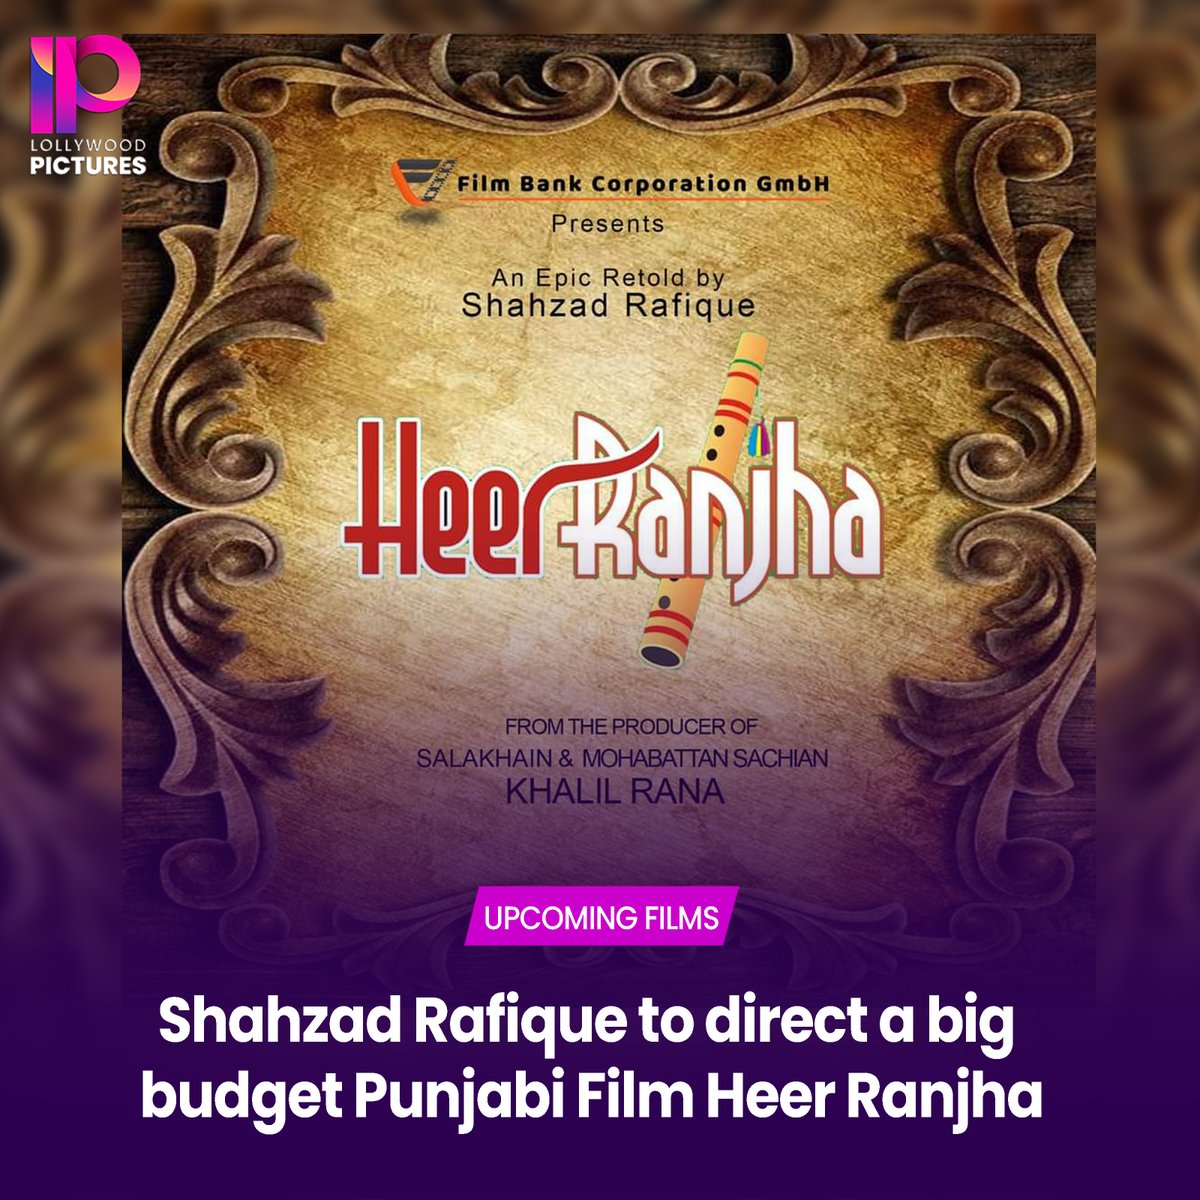 #FilmAnnouncement

#ShahzadRafique is making a directorial comeback with #HeerRanjha, A big-budget Punjabi film produced by the same producer Khalil Rana who previously produced films like #Salakhain and #MohabattanSachian. 

#UpcomingMovies #PunjabiMovies #LollywoodPictures